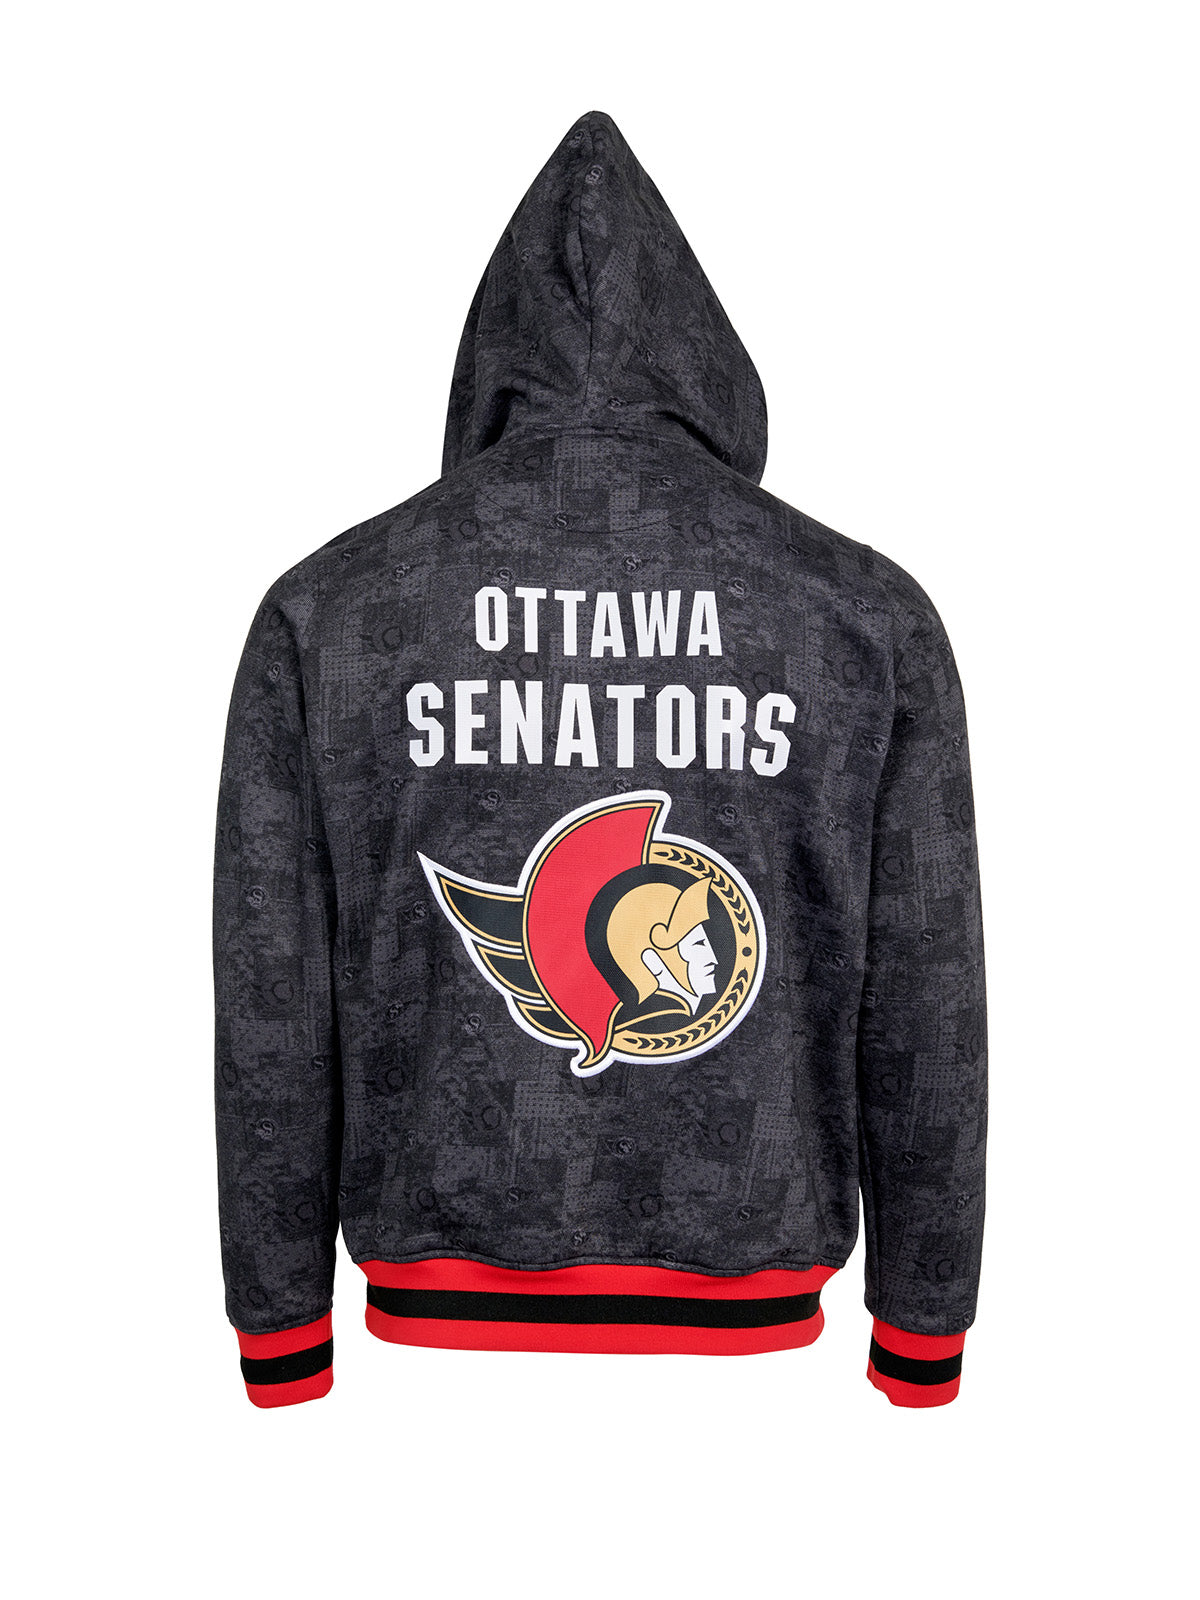 Ottawa Senators Hoodie - Show your team spirit, with the iconic team logo patch centered on the back, and proudly display your Ottawa Senators support in their team colors with this NHL hockey hoodie.